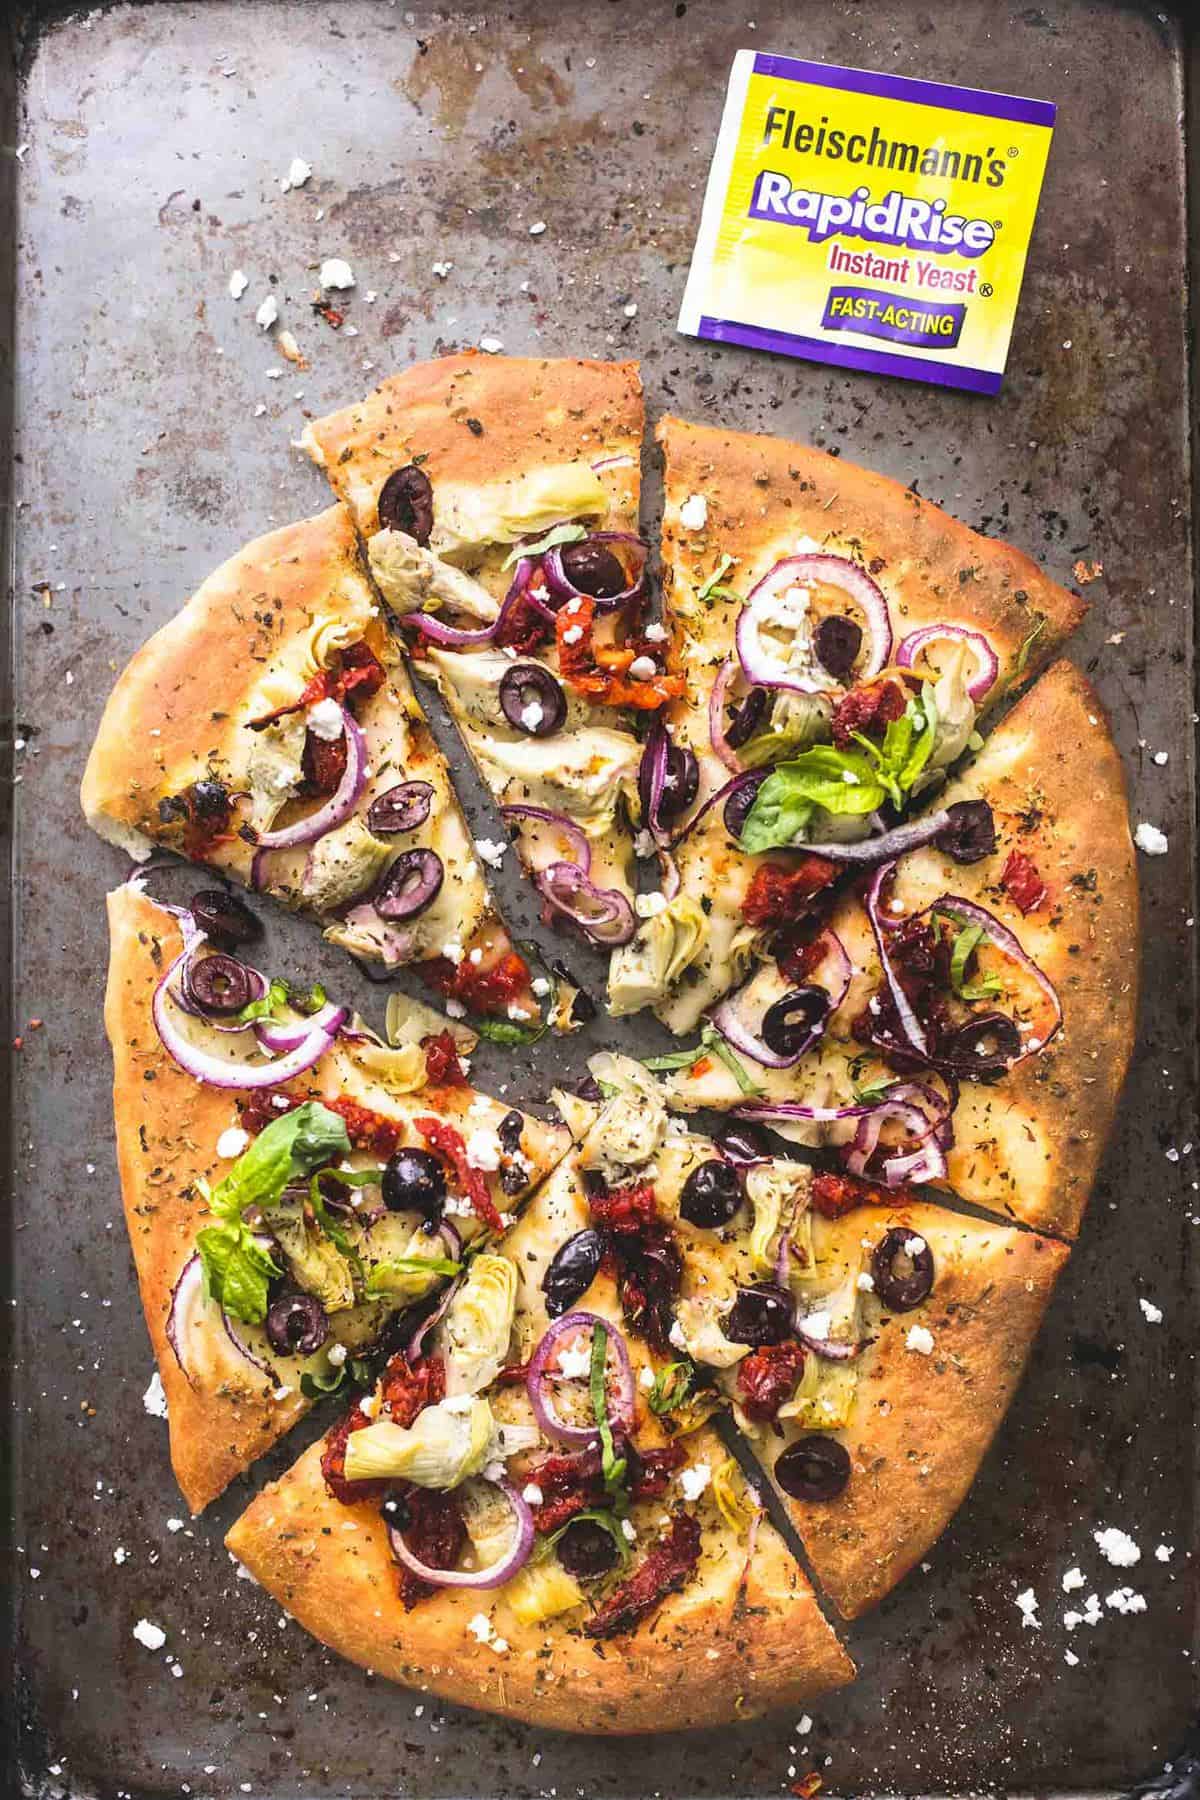 top view of Mediterranean veggie pizza cut up in slices with a RapidRise yeast packet on the side.